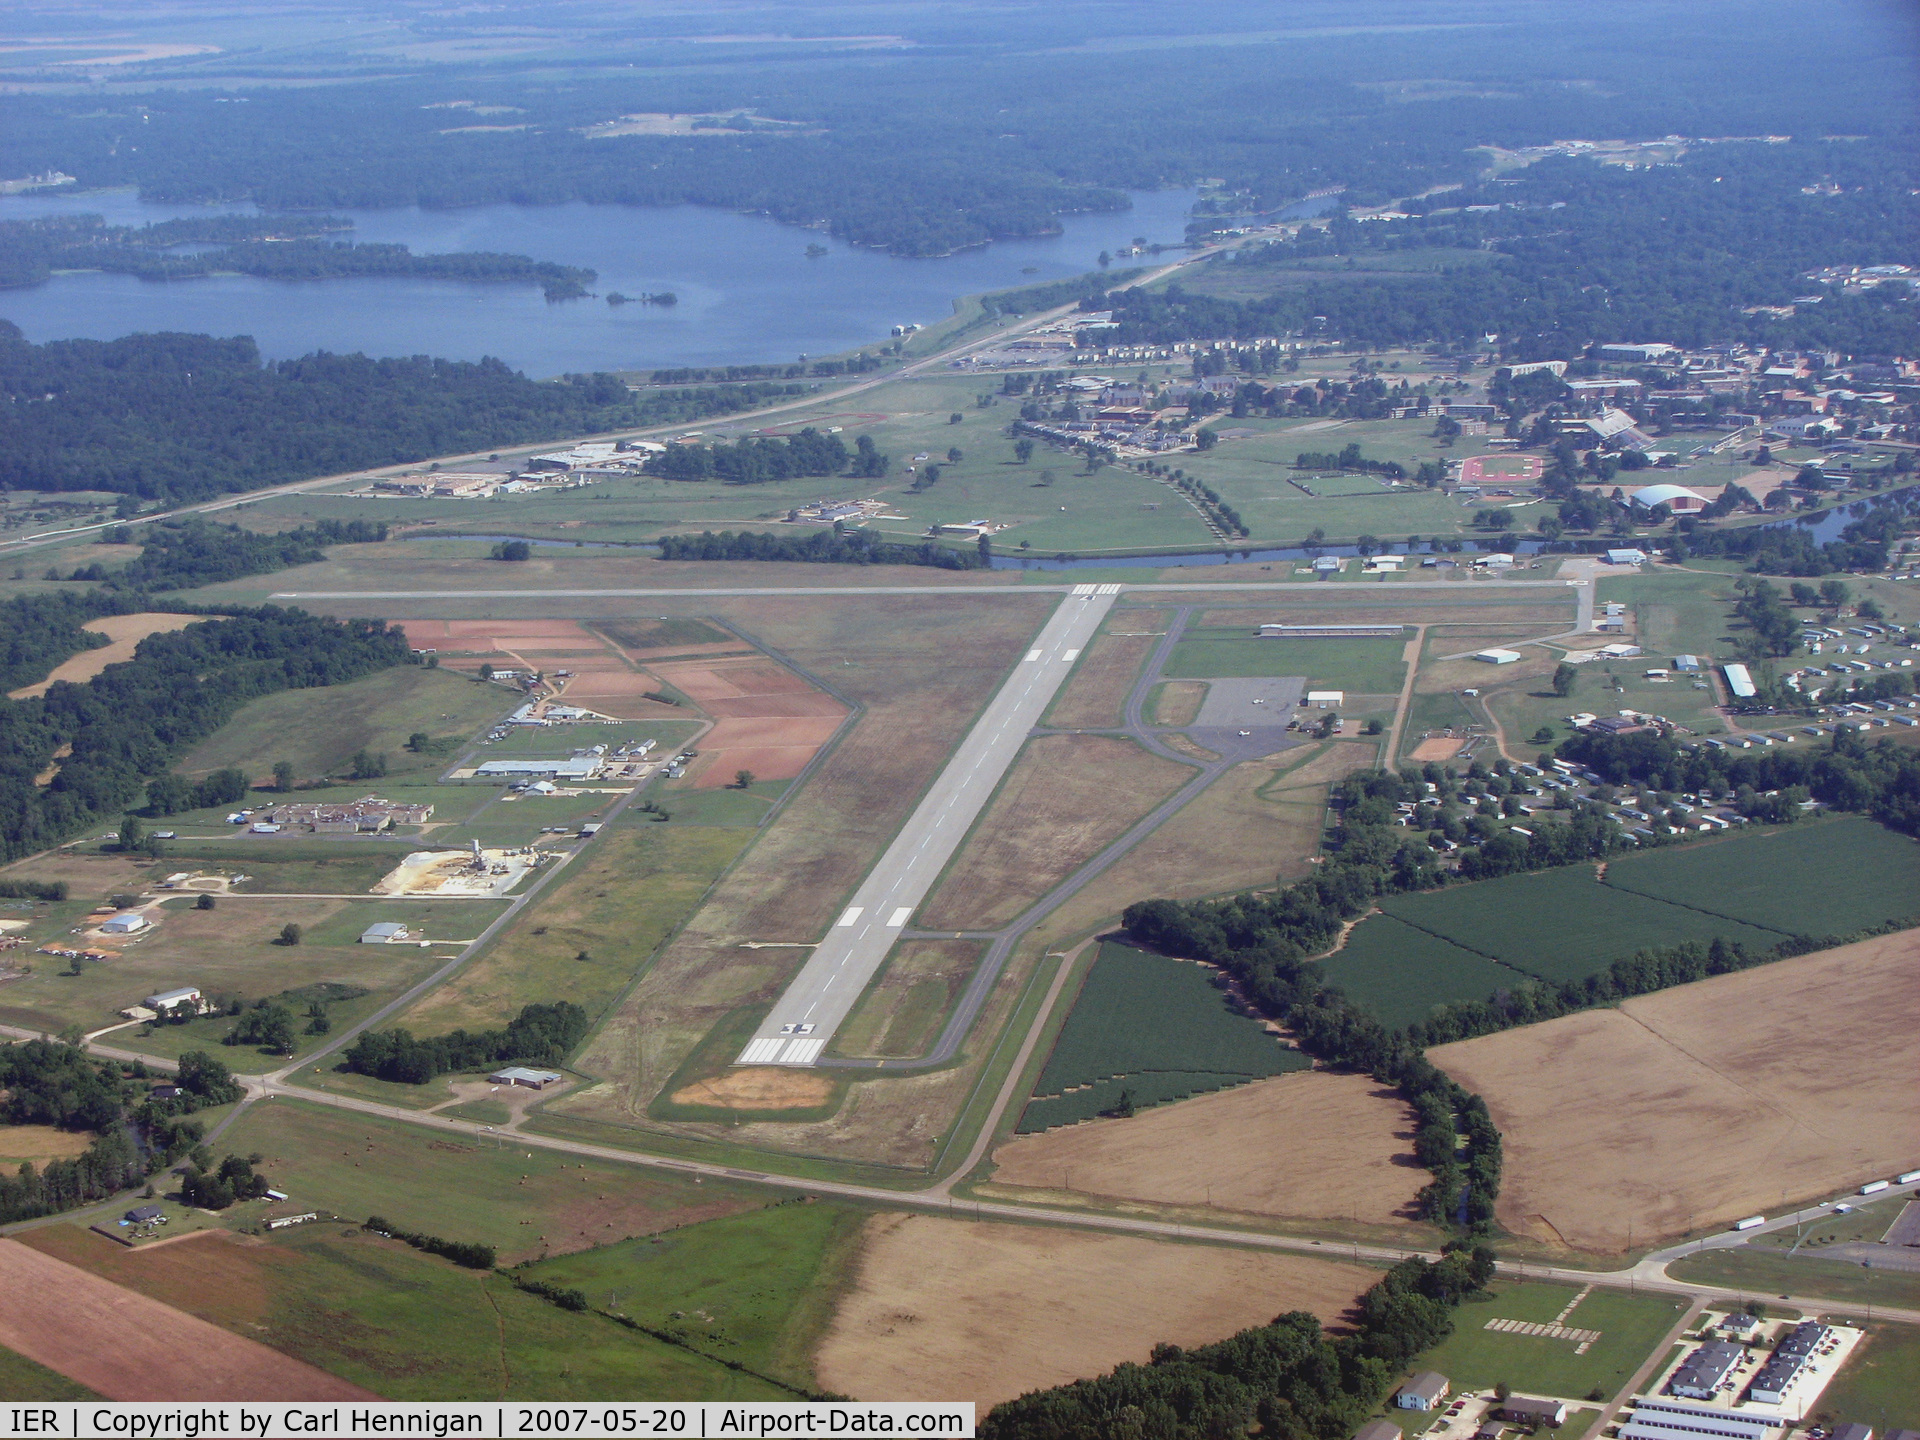 Natchitoches Regional Airport (IER) - Natchitoches looking north